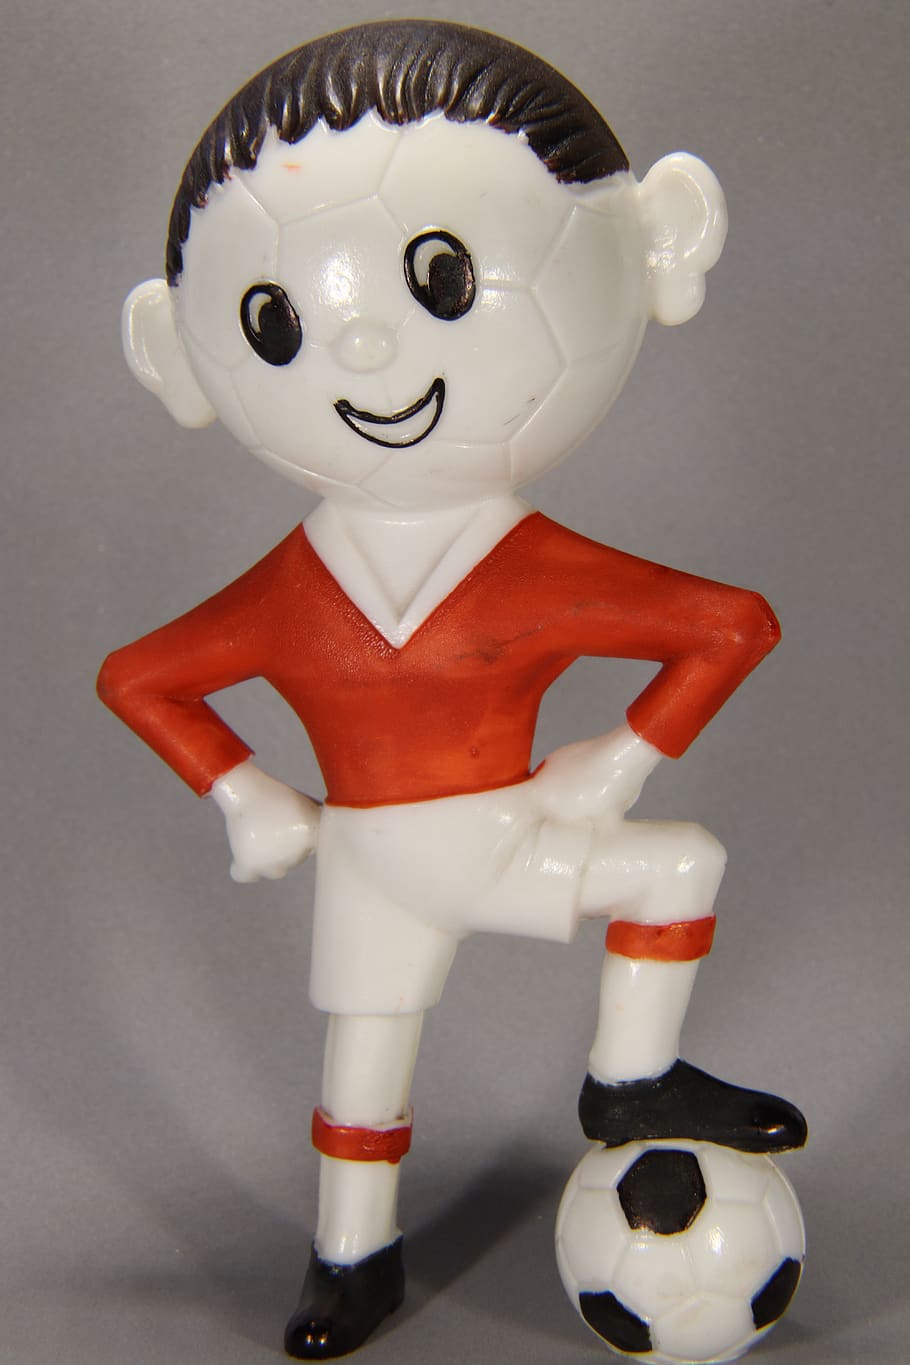 footballers, football, ball, players, plastic, toys, figure, red, jersey, white